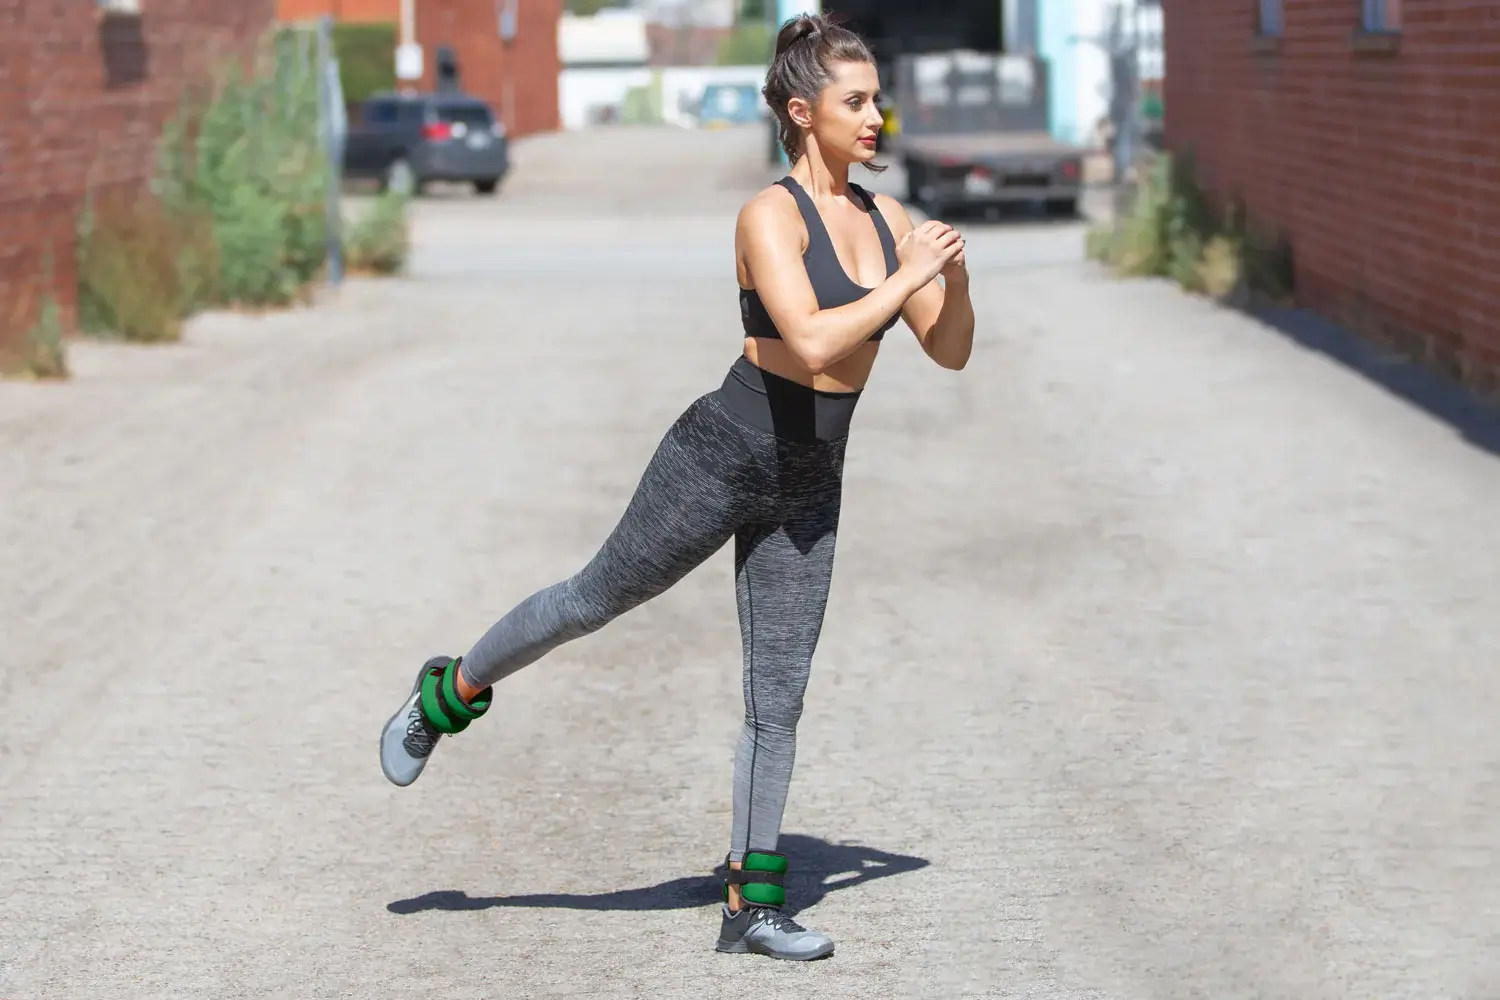 Do ankle weights make you a stronger runner?